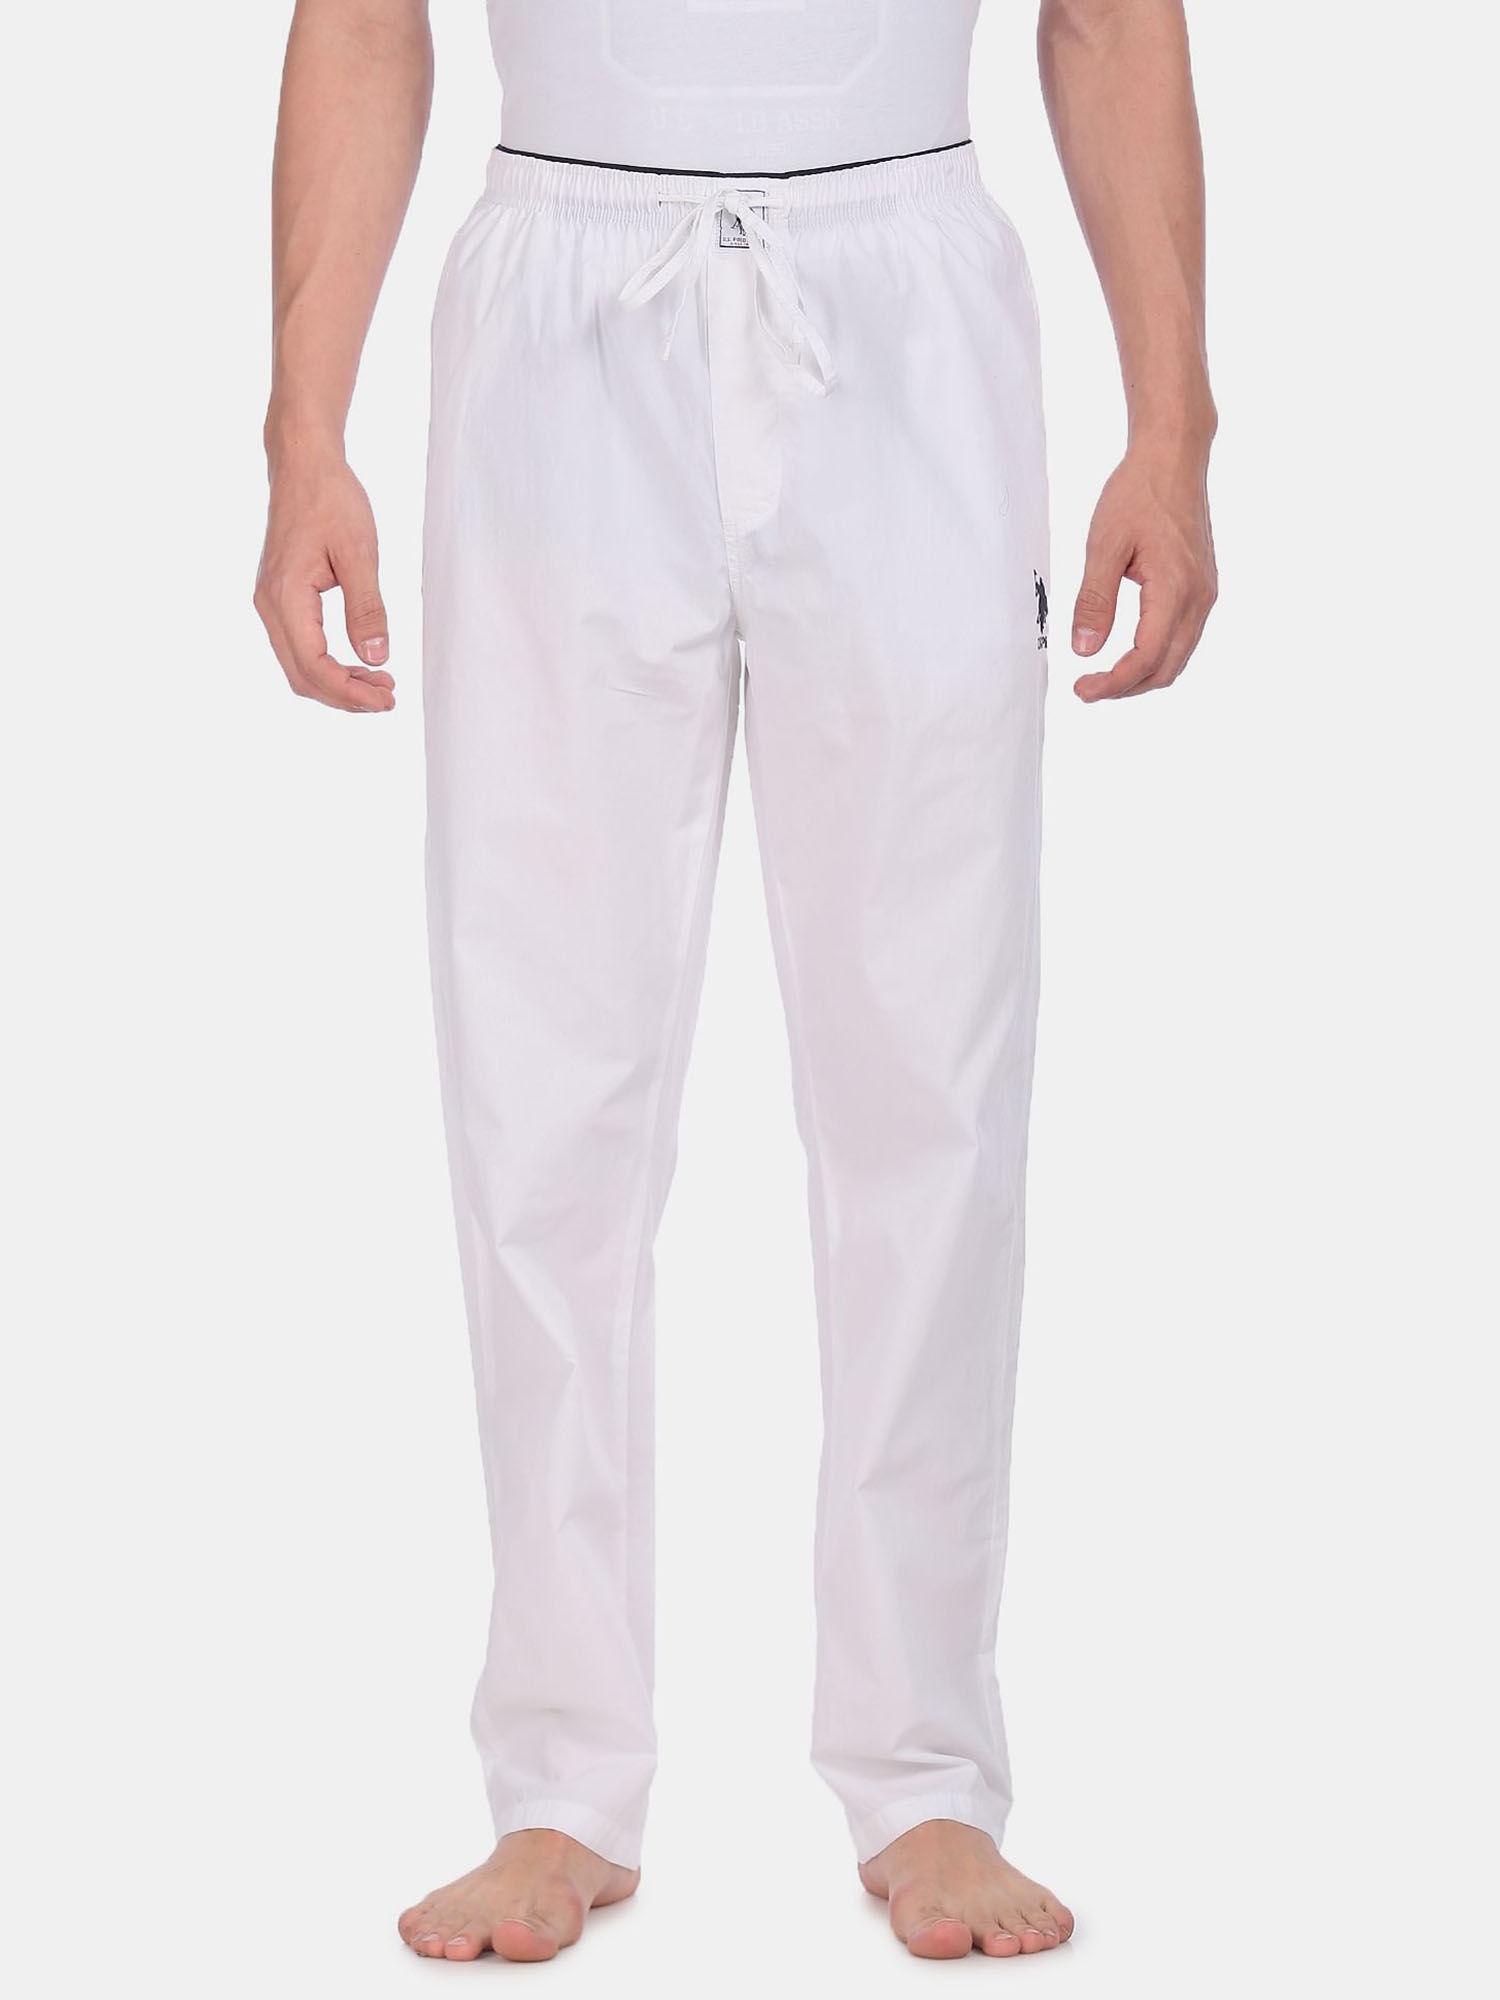 men white i690 comfort fit solid cotton lounge pants white